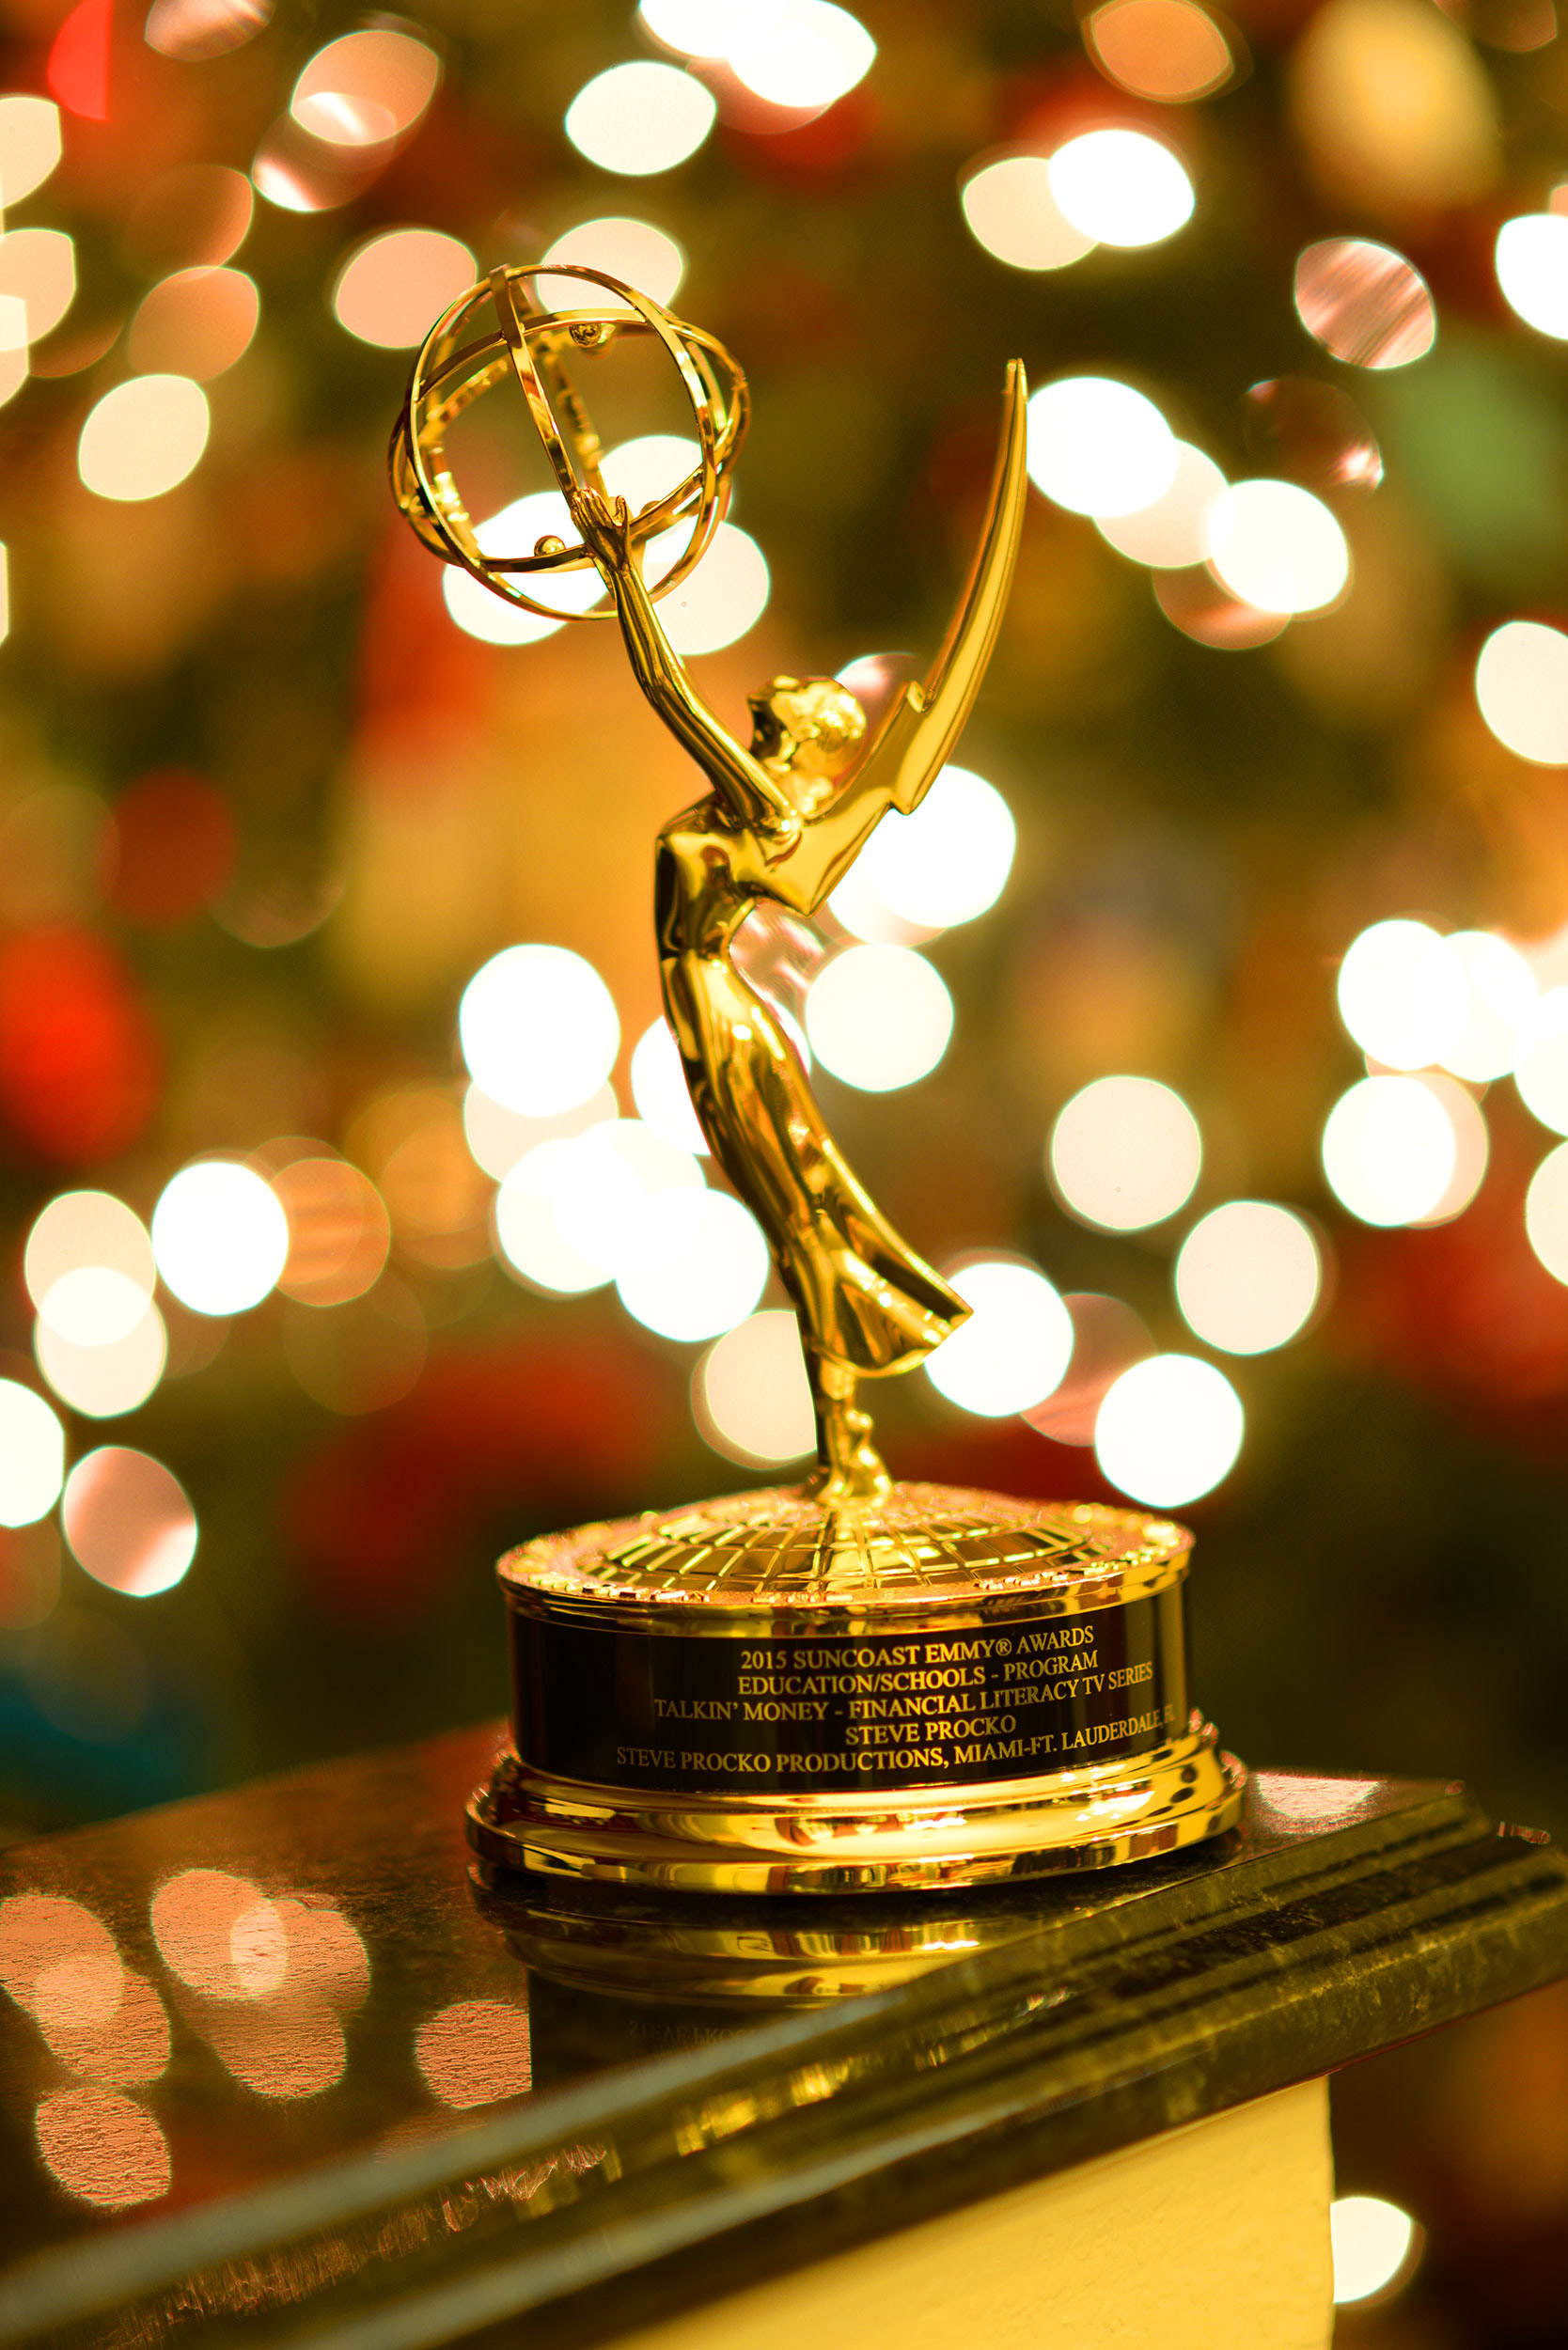 The National Academy of Television Arts and Sciences has awarded Steve Procko Productions an Emmy Award in the Educational Programming category for its Talkin’ Money Financial Literacy Educational Video program.